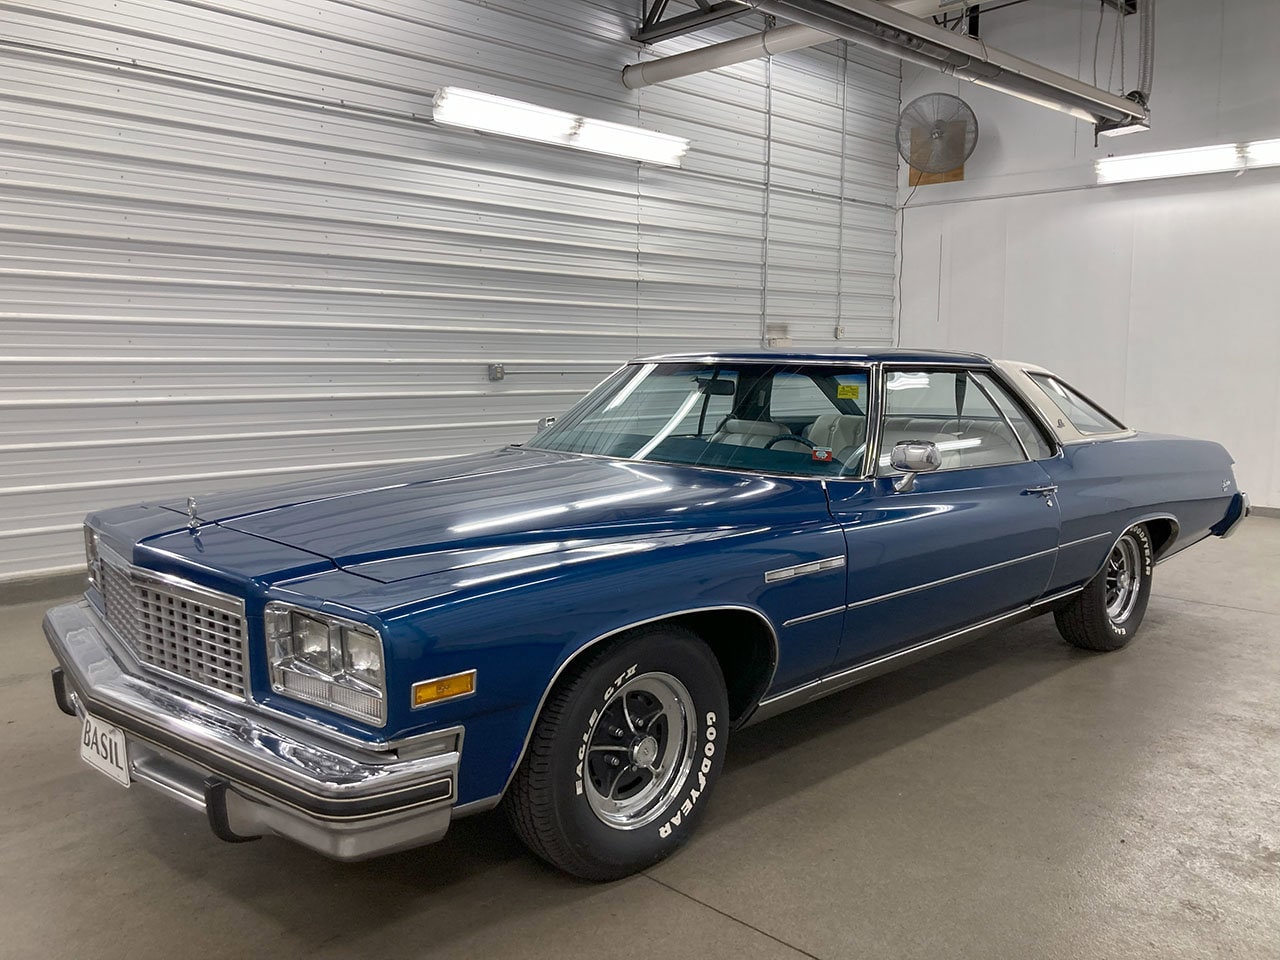 Used 1976 Buick Lesabre For Sale at Basil Toyota | VIN: 4P57J6H421698